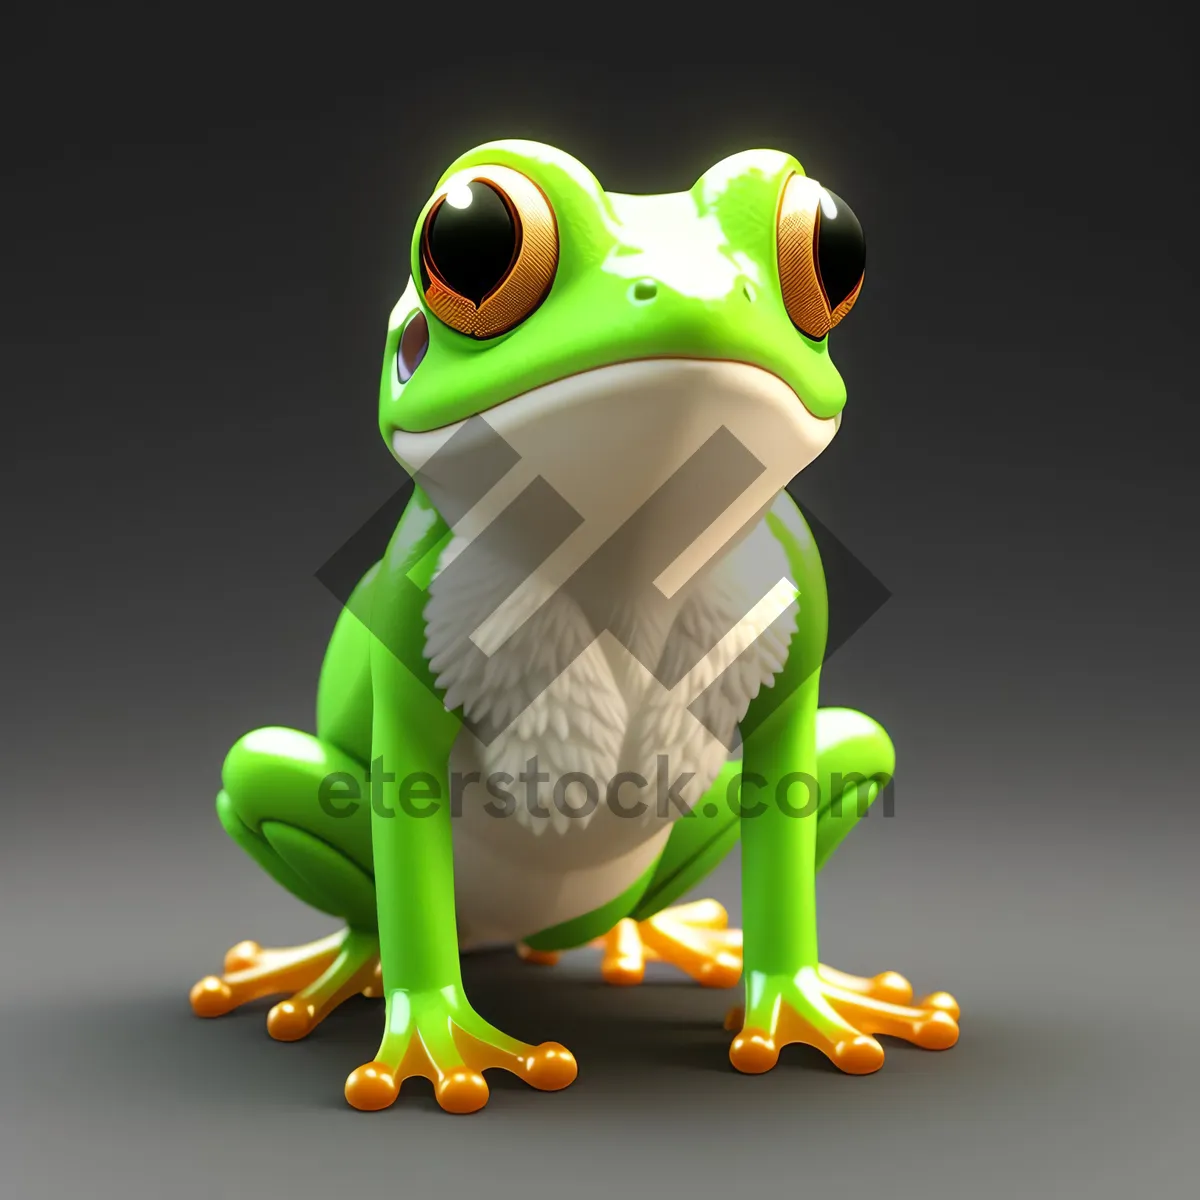 Picture of Cute Cartoon Frog with Big Eyes